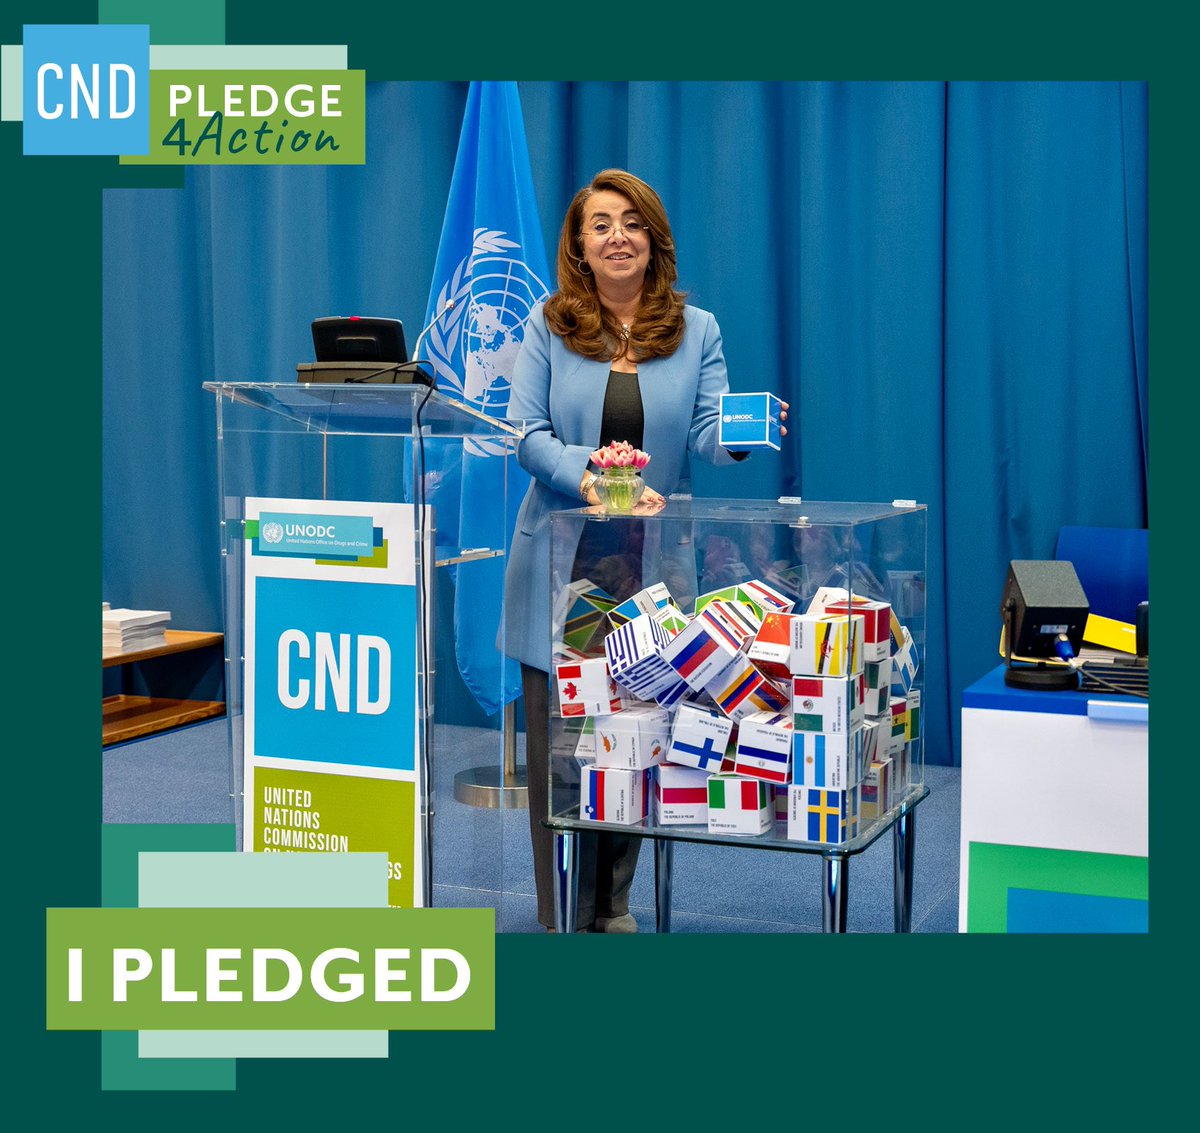 It’s been a remarkable high-level session of the CND, with 2,500+ participants, 4 resolutions adopted & 170 side-events.

At this year’s closing, I was proud to make the 67th #Pledge4Action of #CND67, to support a paradigm shift towards much stronger drug prevention frameworks.